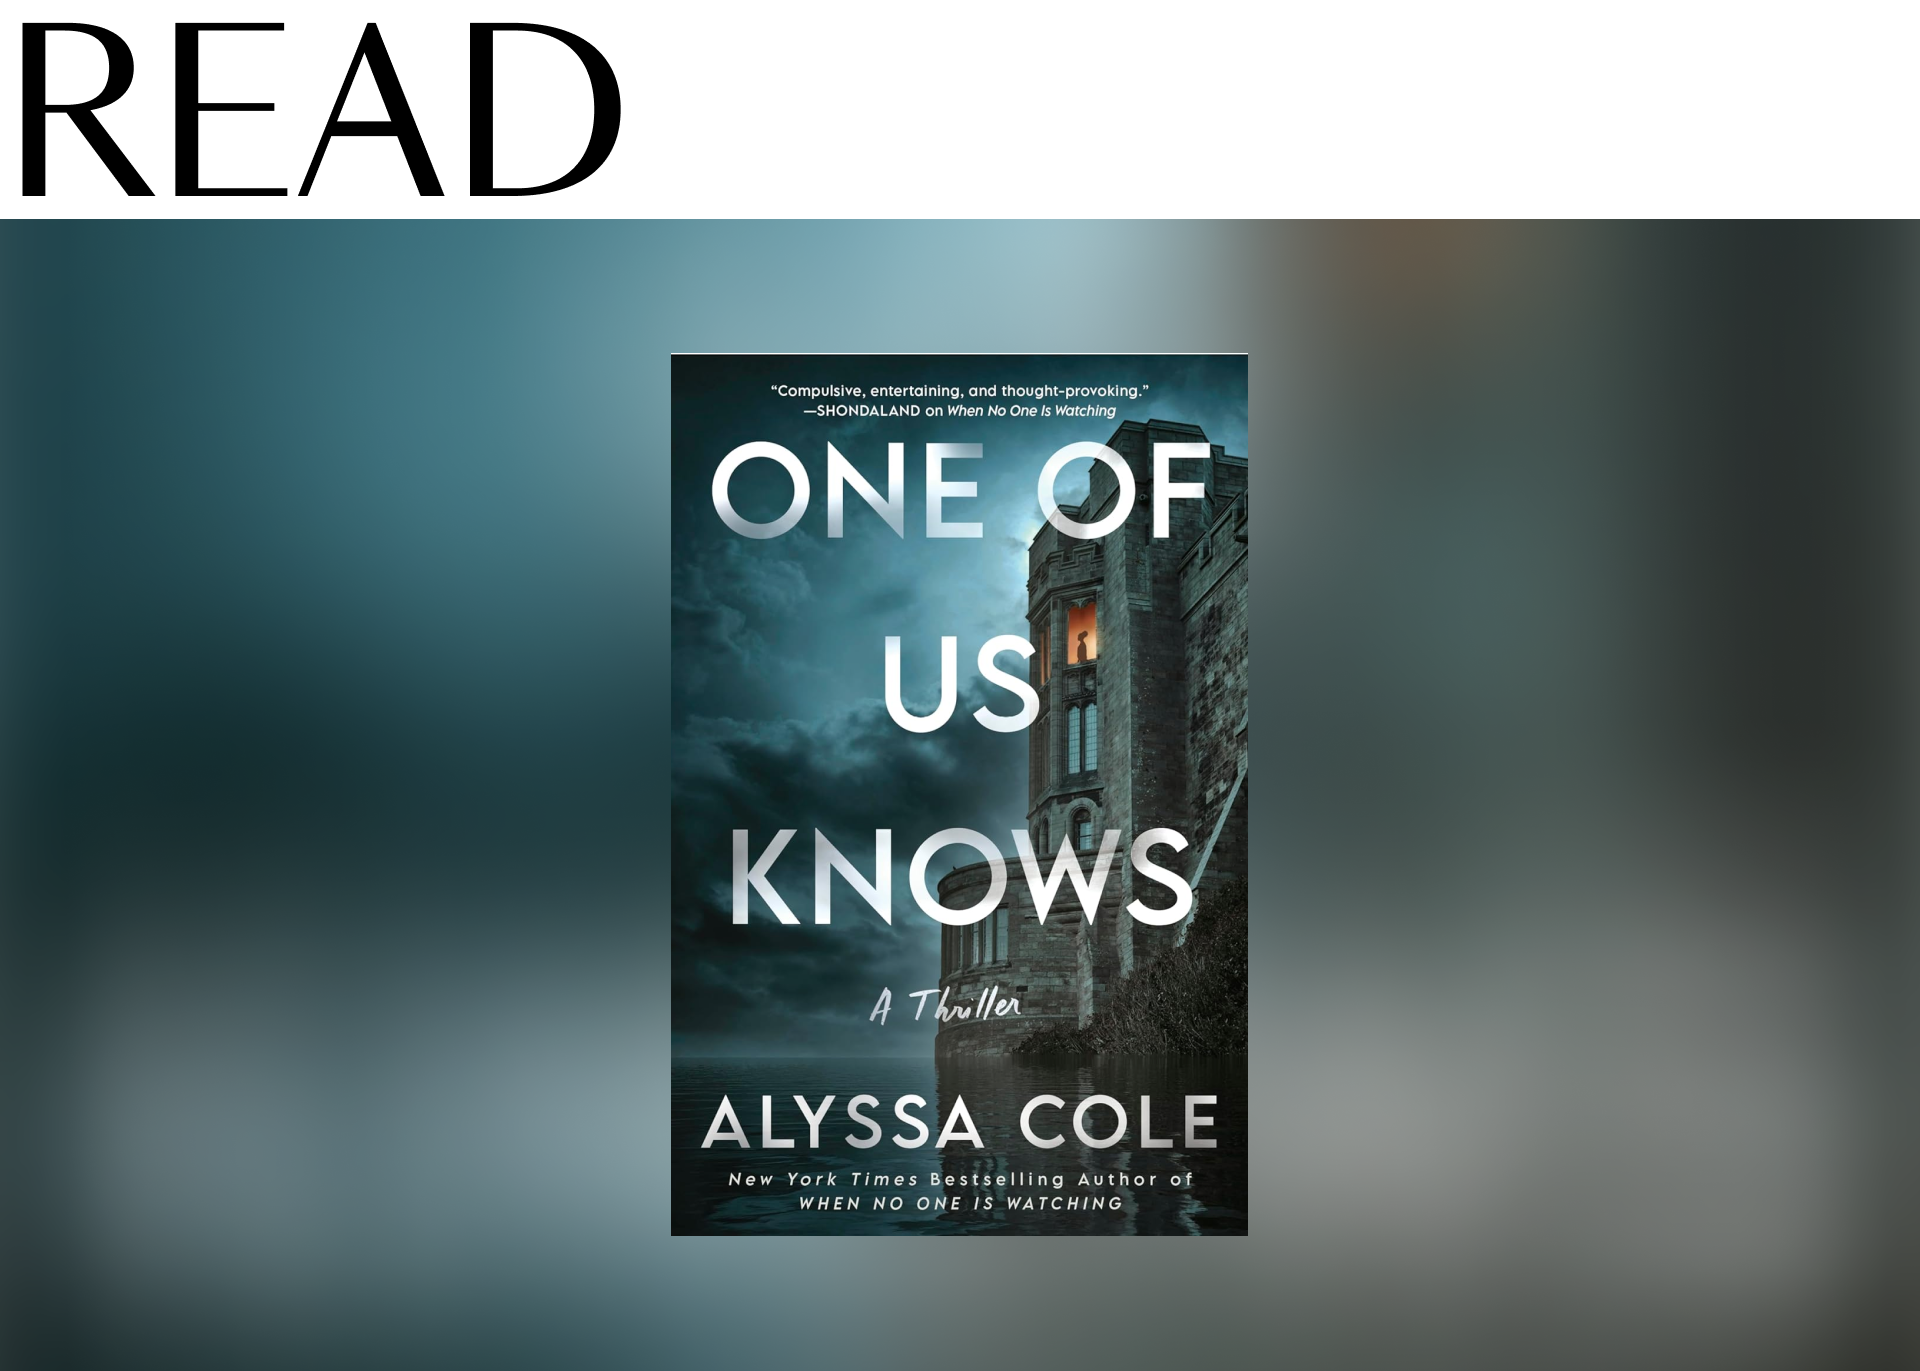 READ: “One of Us Knows” by Alyssa Cole 